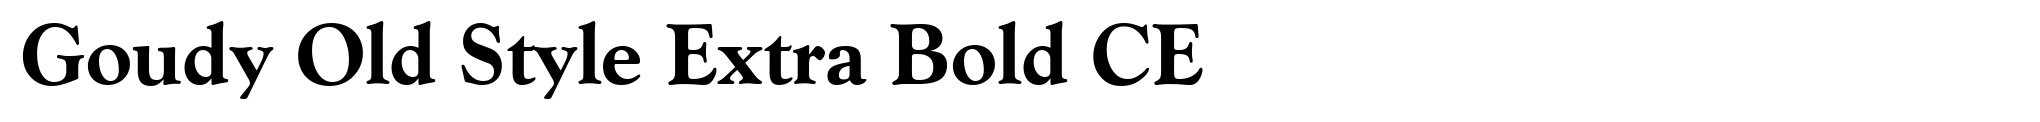 Goudy Old Style Extra Bold CE image